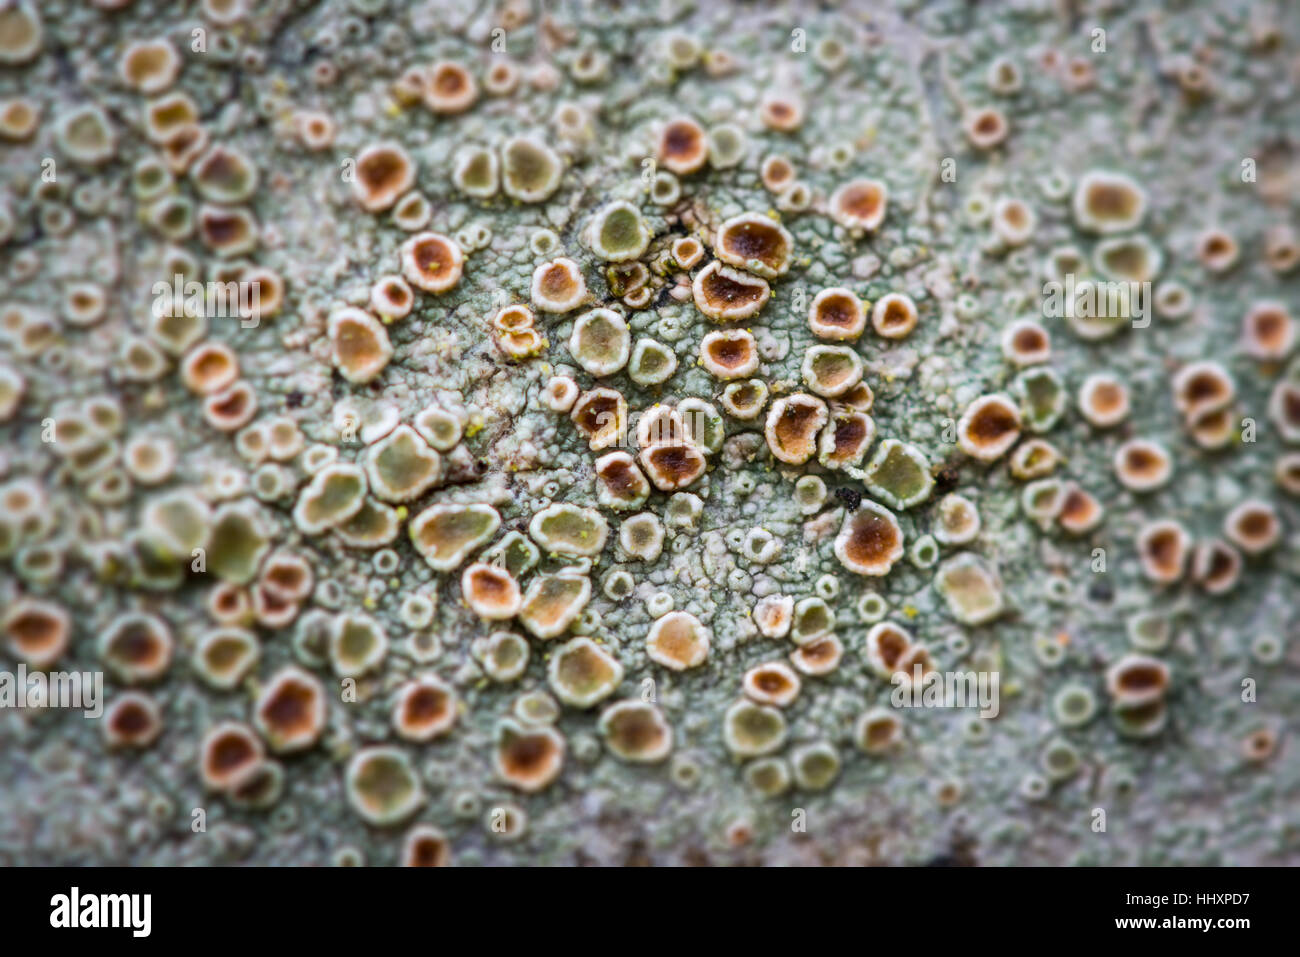 Macro close-up of multicoloured apothecia of a crustose lichen growing on a tree. Brecon Beacons National Park, Wales, UK, January Stock Photo